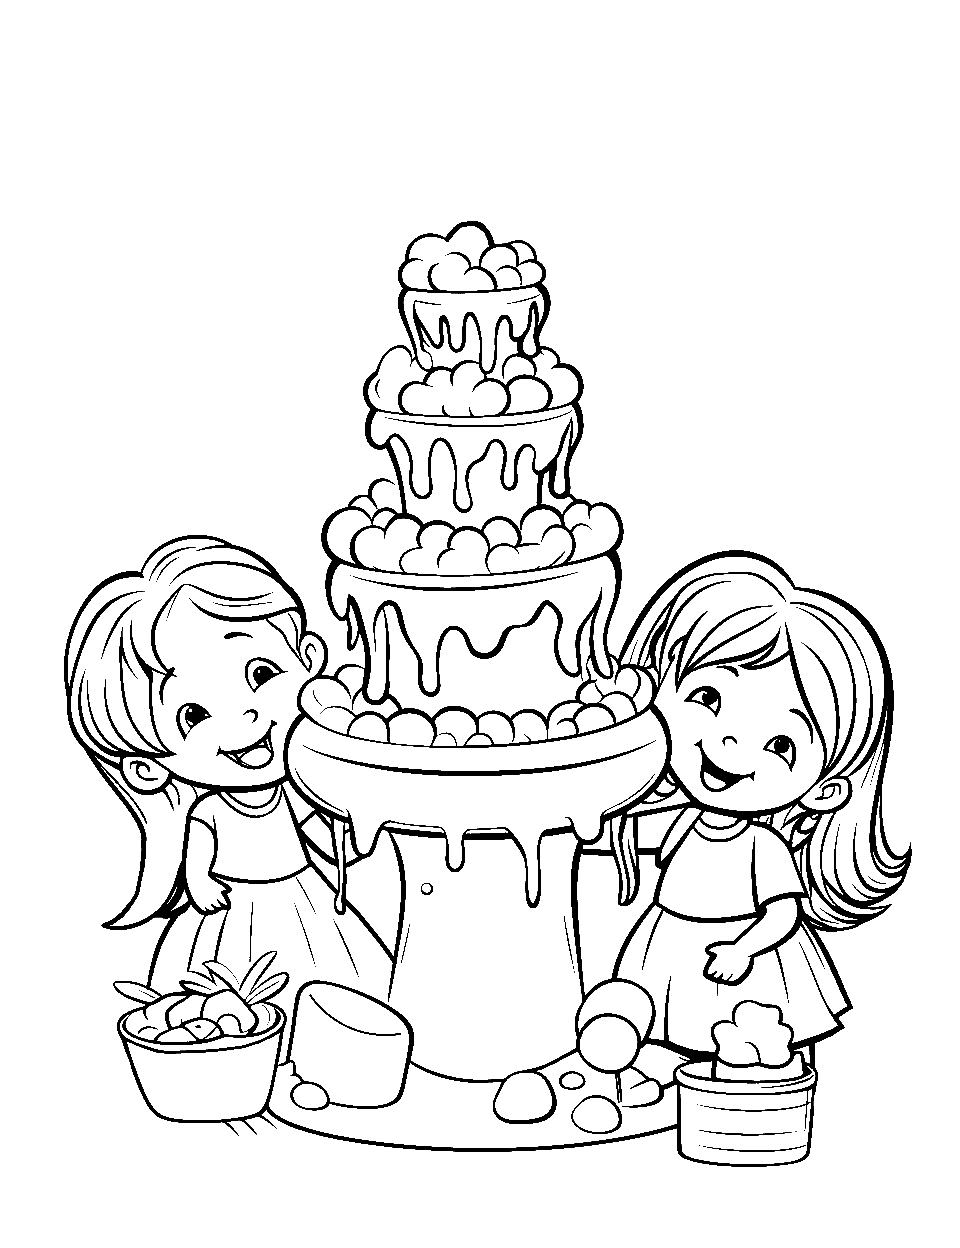 Chocolate Fountain Fiesta Coloring Page - Shopkins gathered around a cascading chocolate fountain, enjoying the treat.